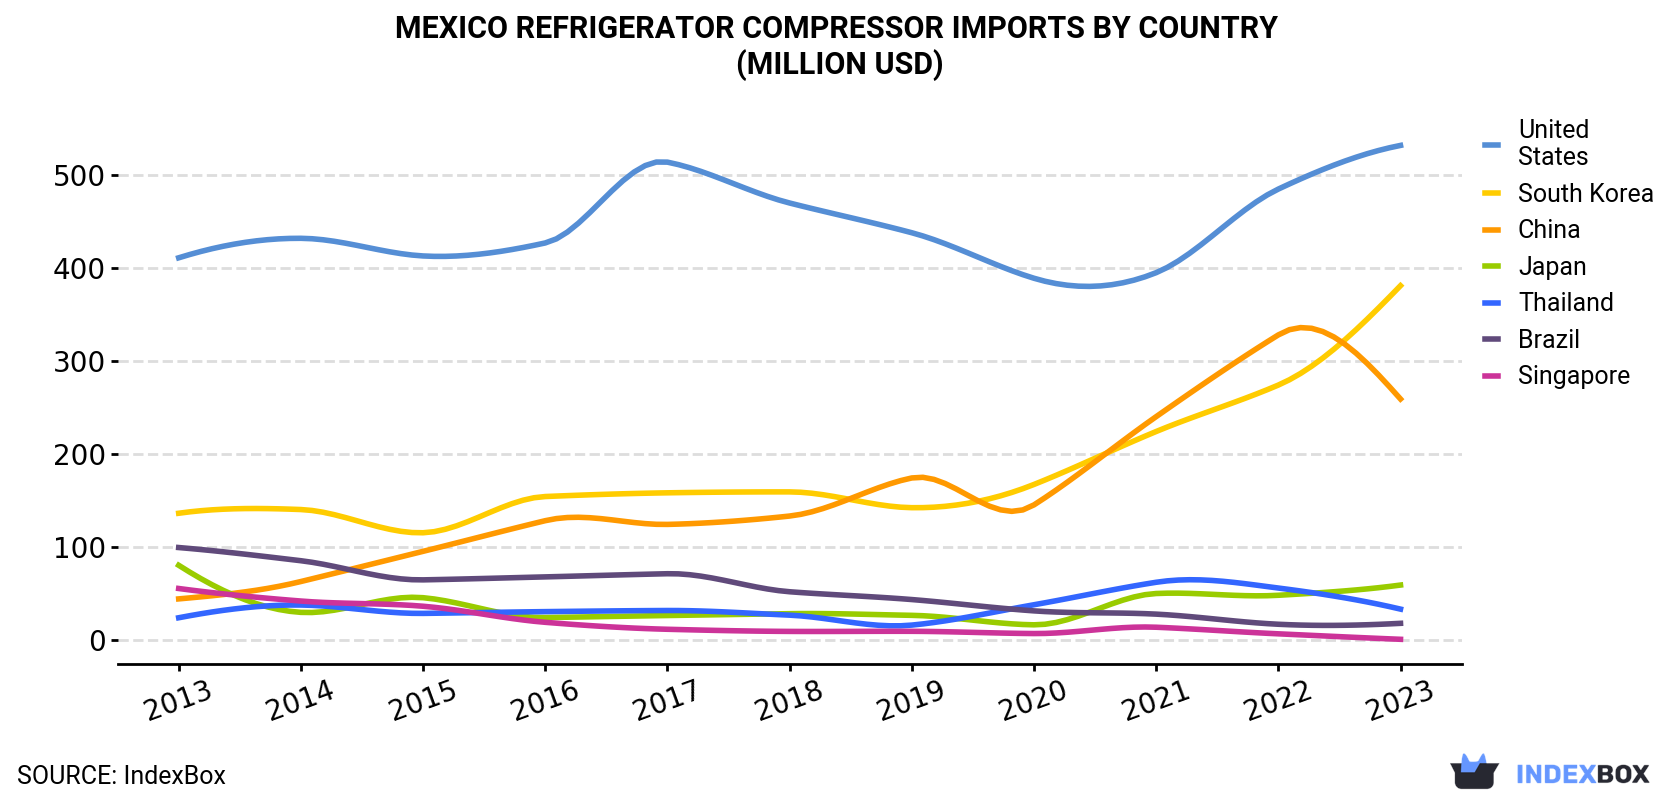 Mexico Refrigerator Compressor Imports By Country (Million USD)